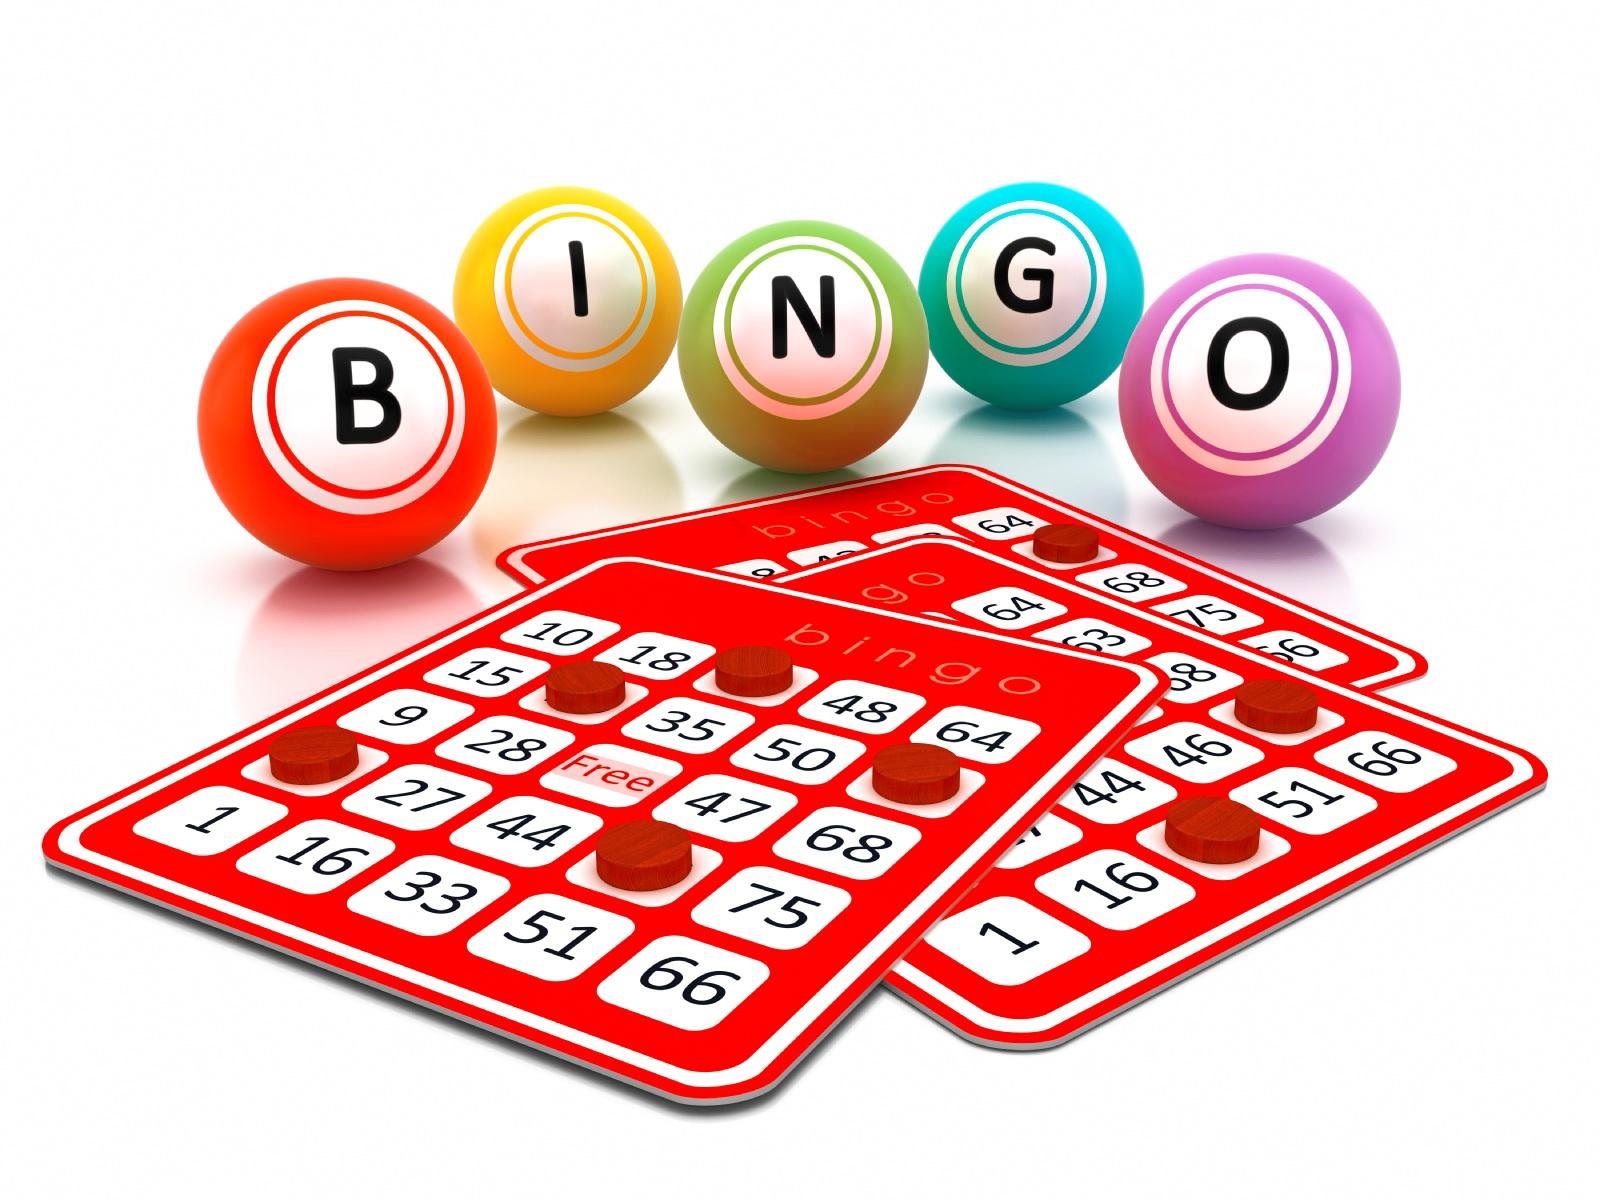 Bingo Clipart Group with items